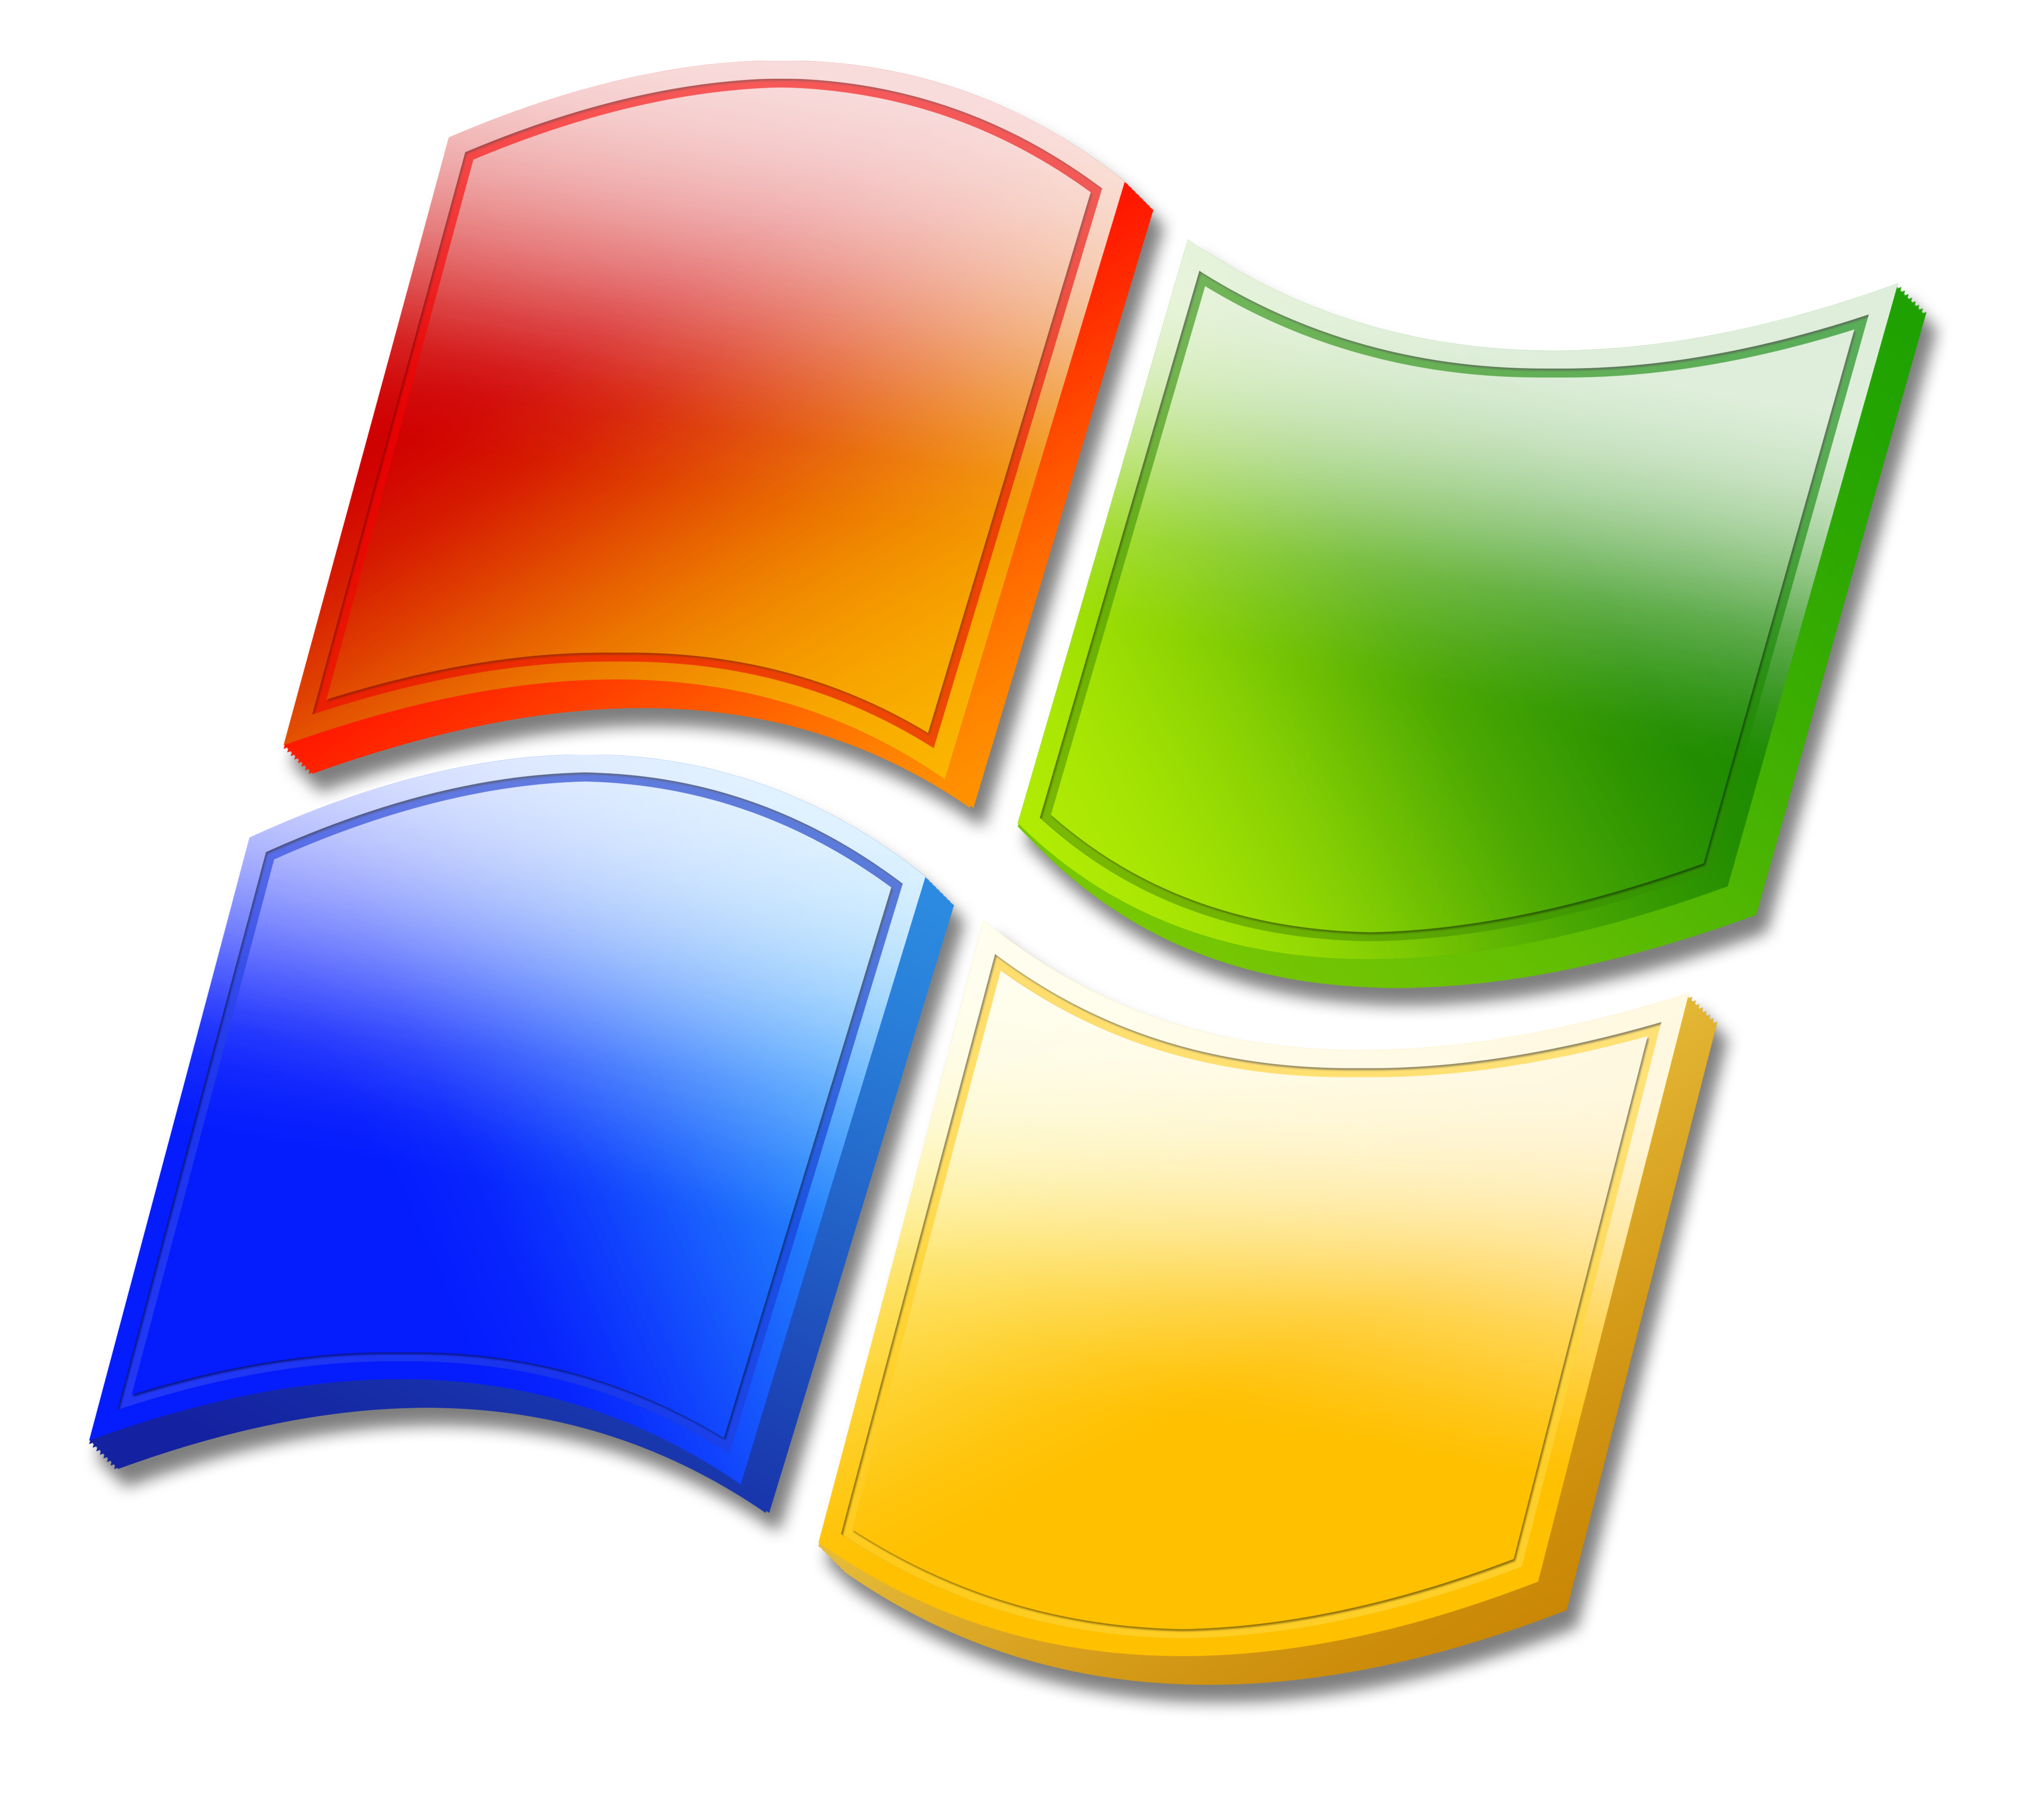 clip art free download for windows 7 - photo #6